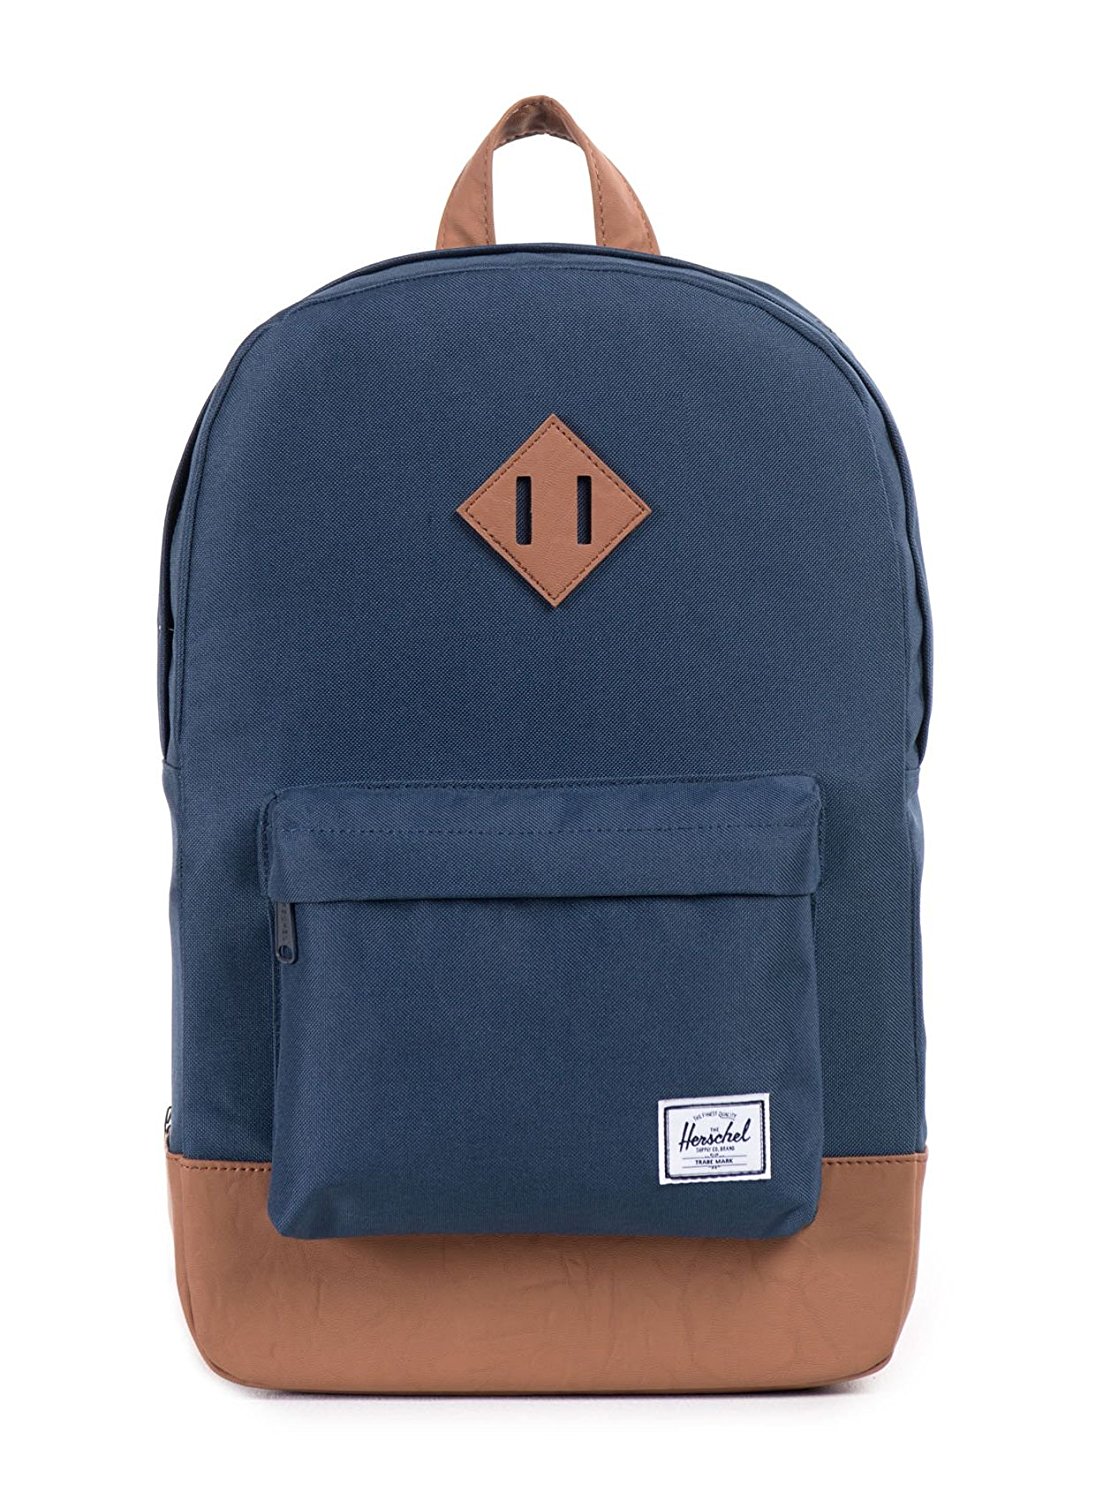 Here Are The 10 Best Backpacks Under $100 For School, Work, Or Wherever ...